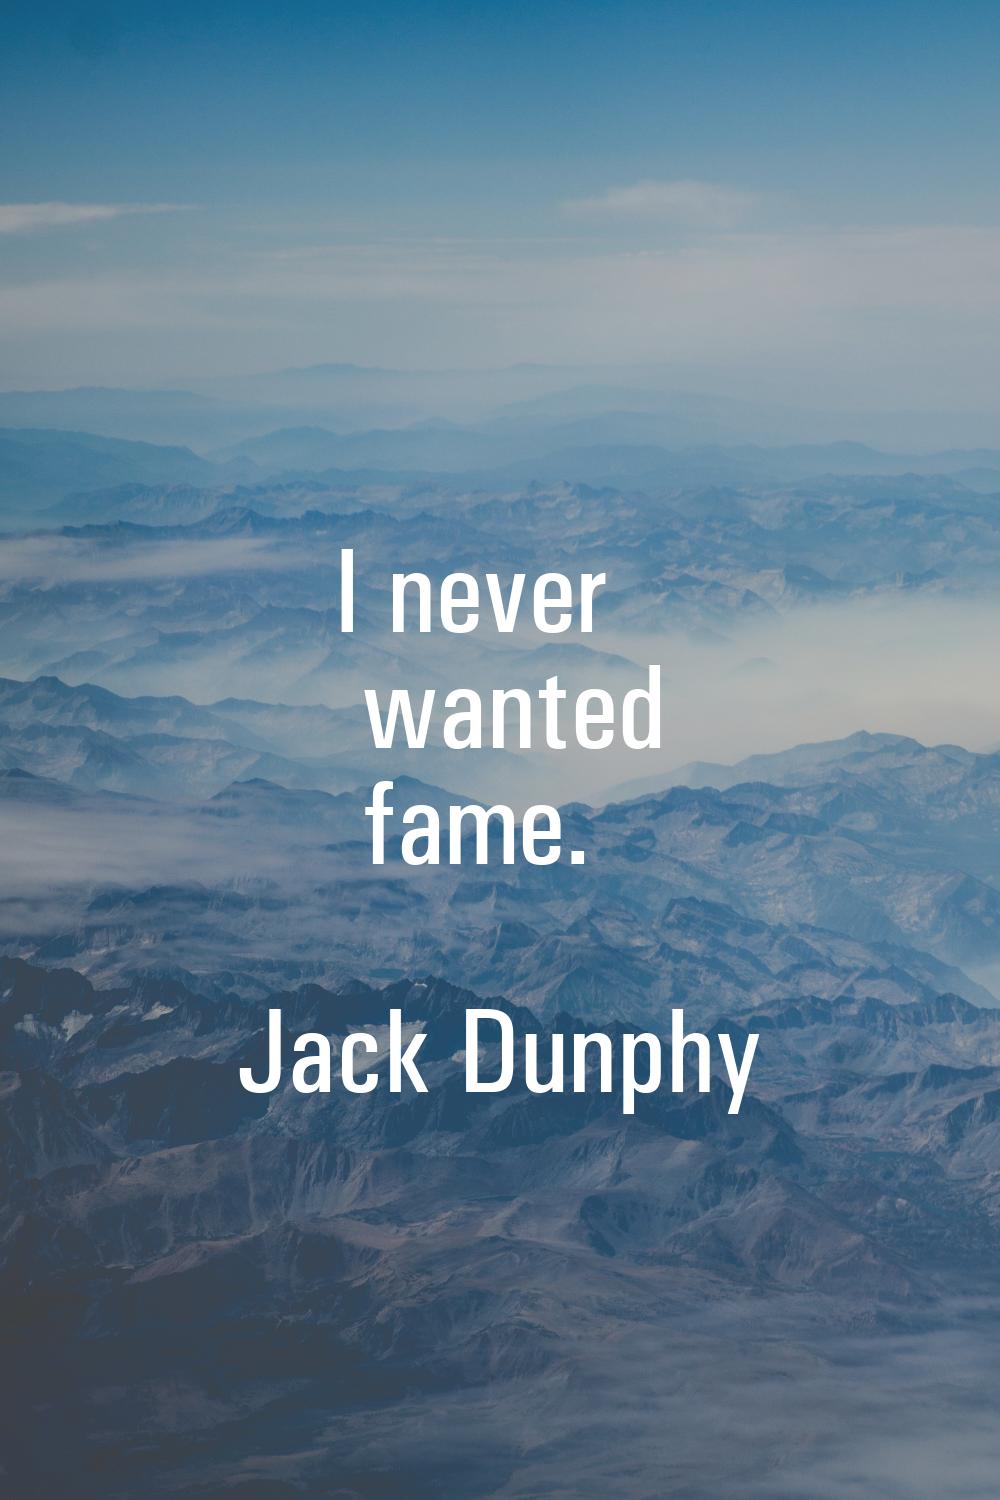 I never wanted fame.